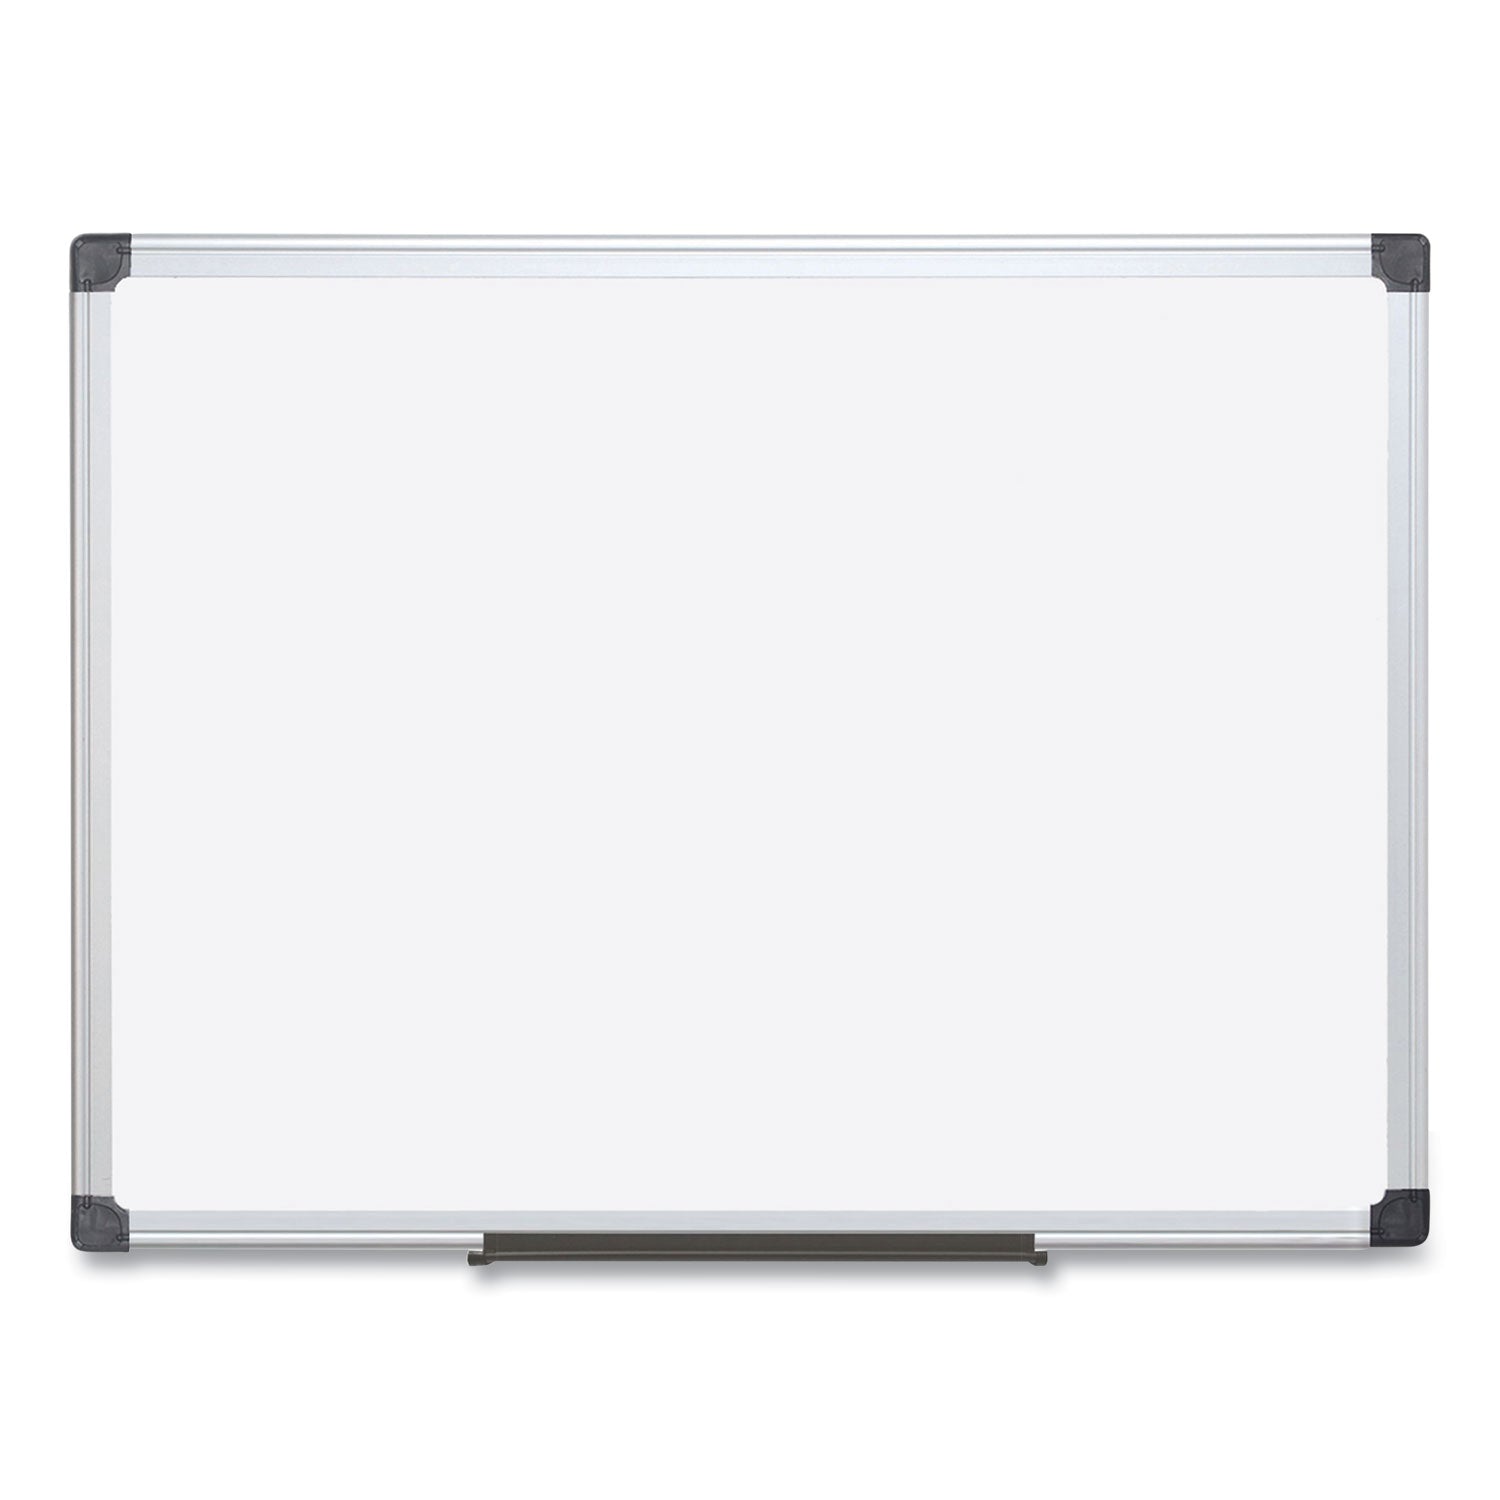 Value Lacquered Steel Magnetic Dry Erase Board, 18 x 24, White Surface, Silver Aluminum Frame - 